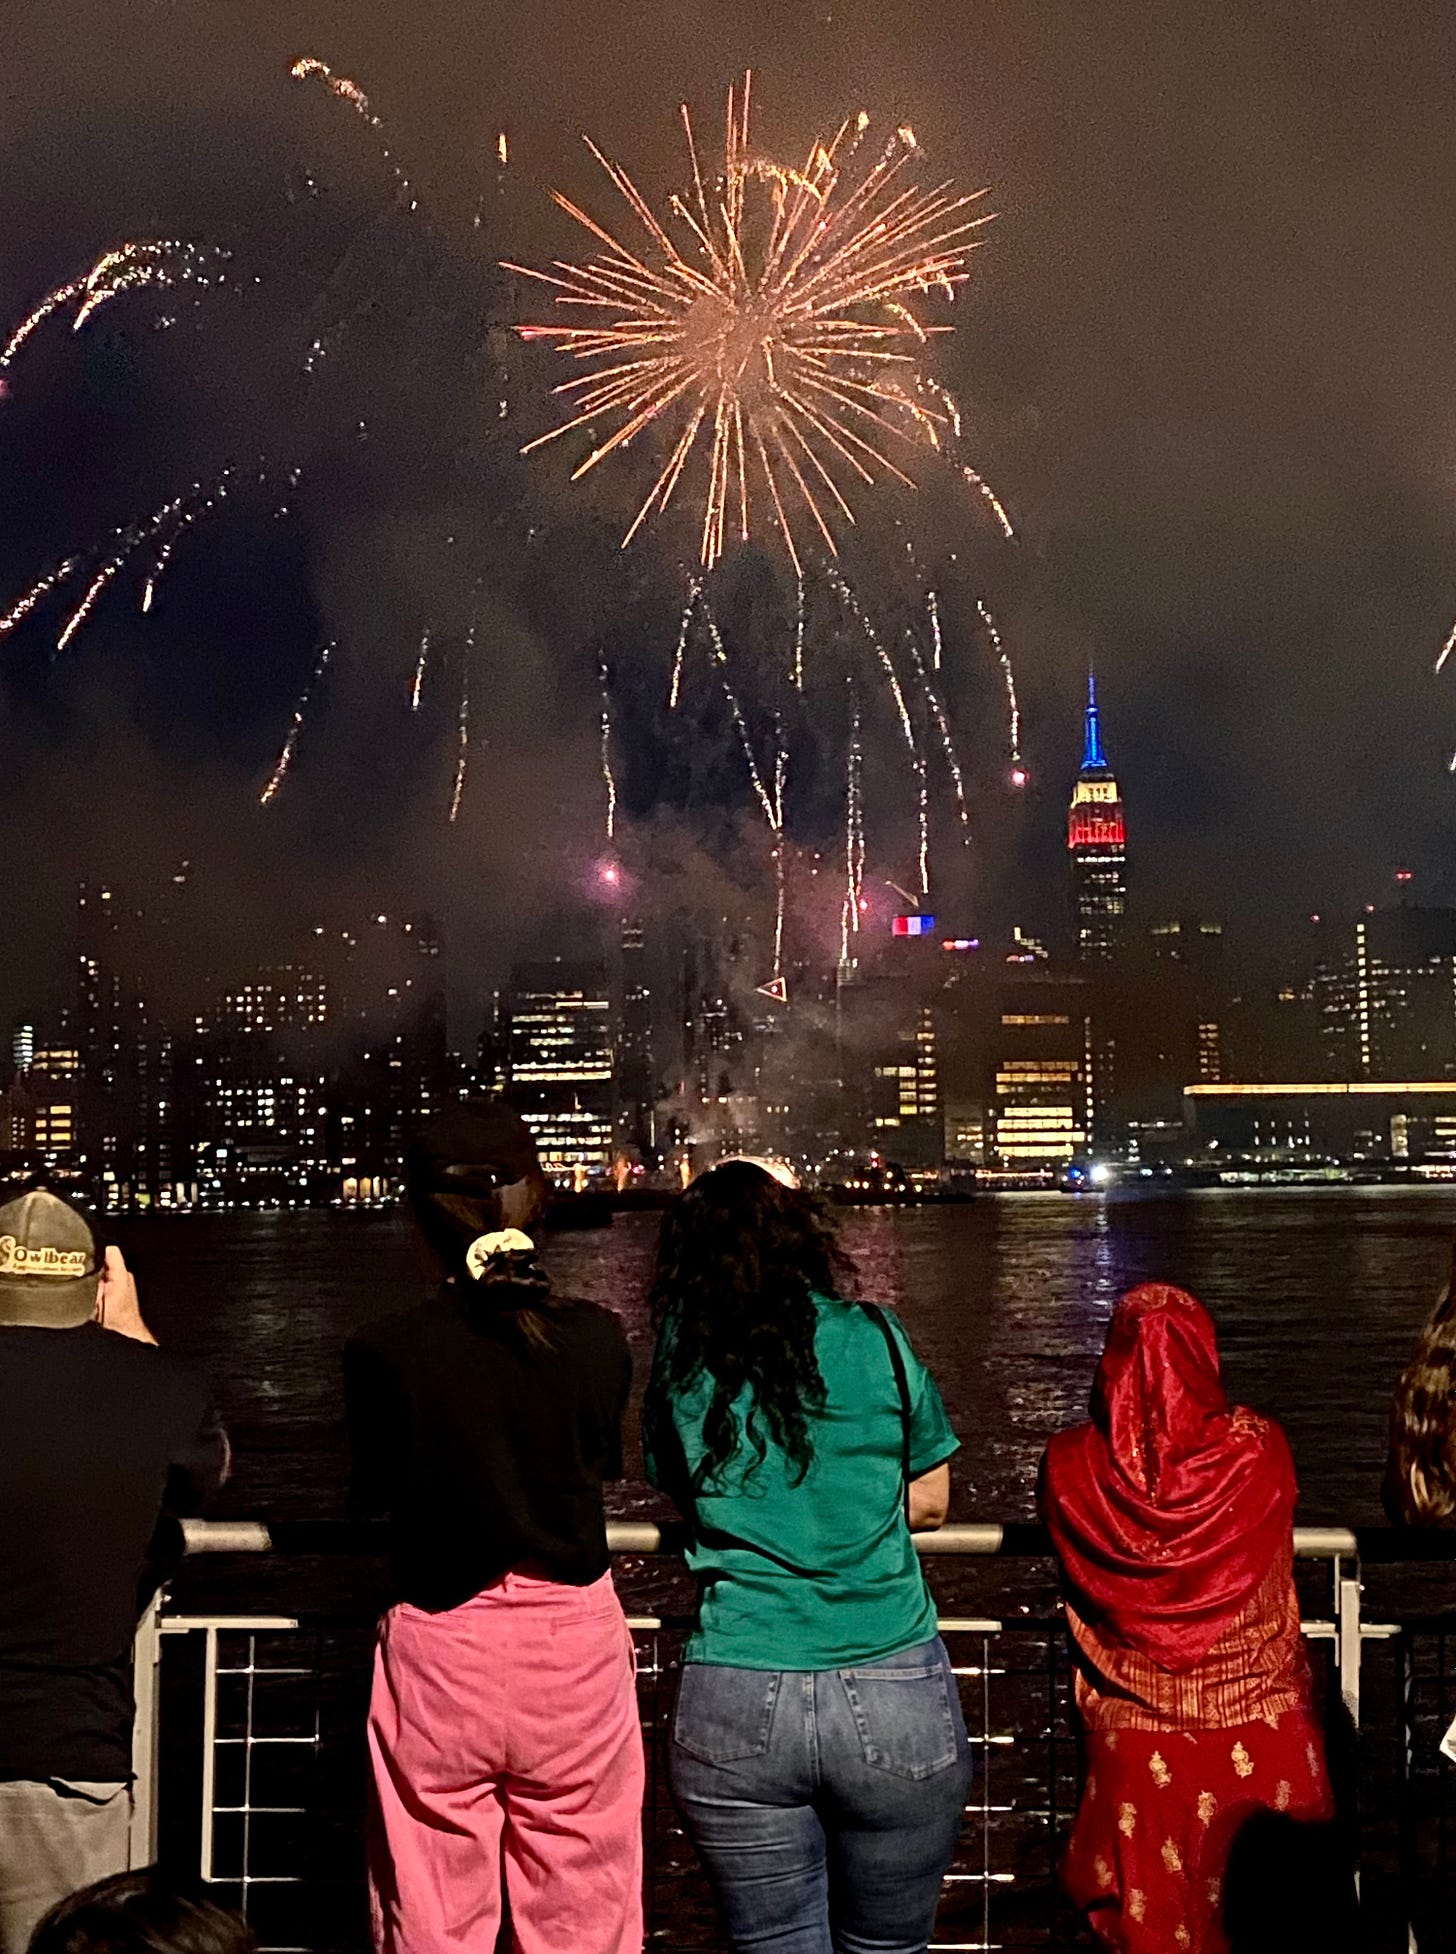 Four New Yorkers leaning on the river rail to watch the 4th of July fireworks. The Empire State Building is visible across the river, light up red, white, and blue.